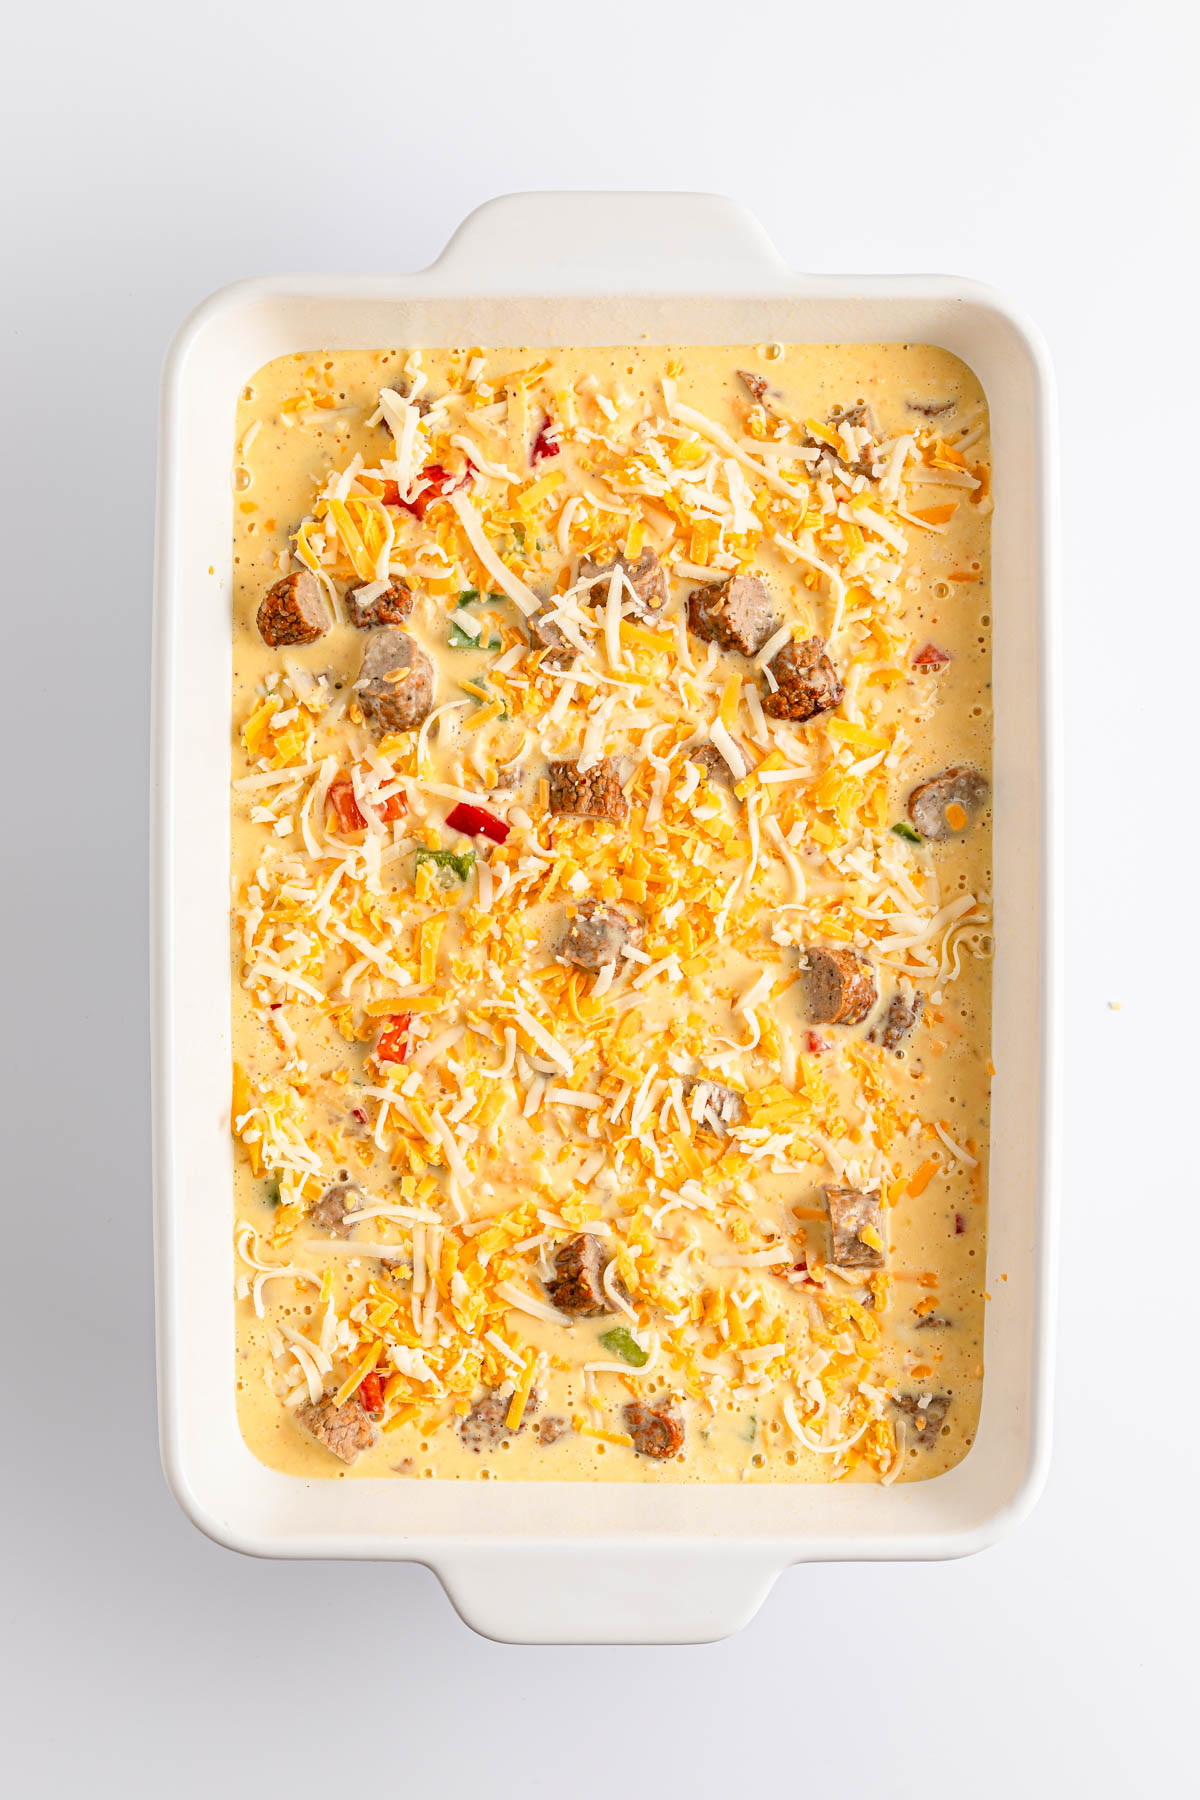 Uncooked casserole dish with shredded cheese and mixed ingredients on a white background.